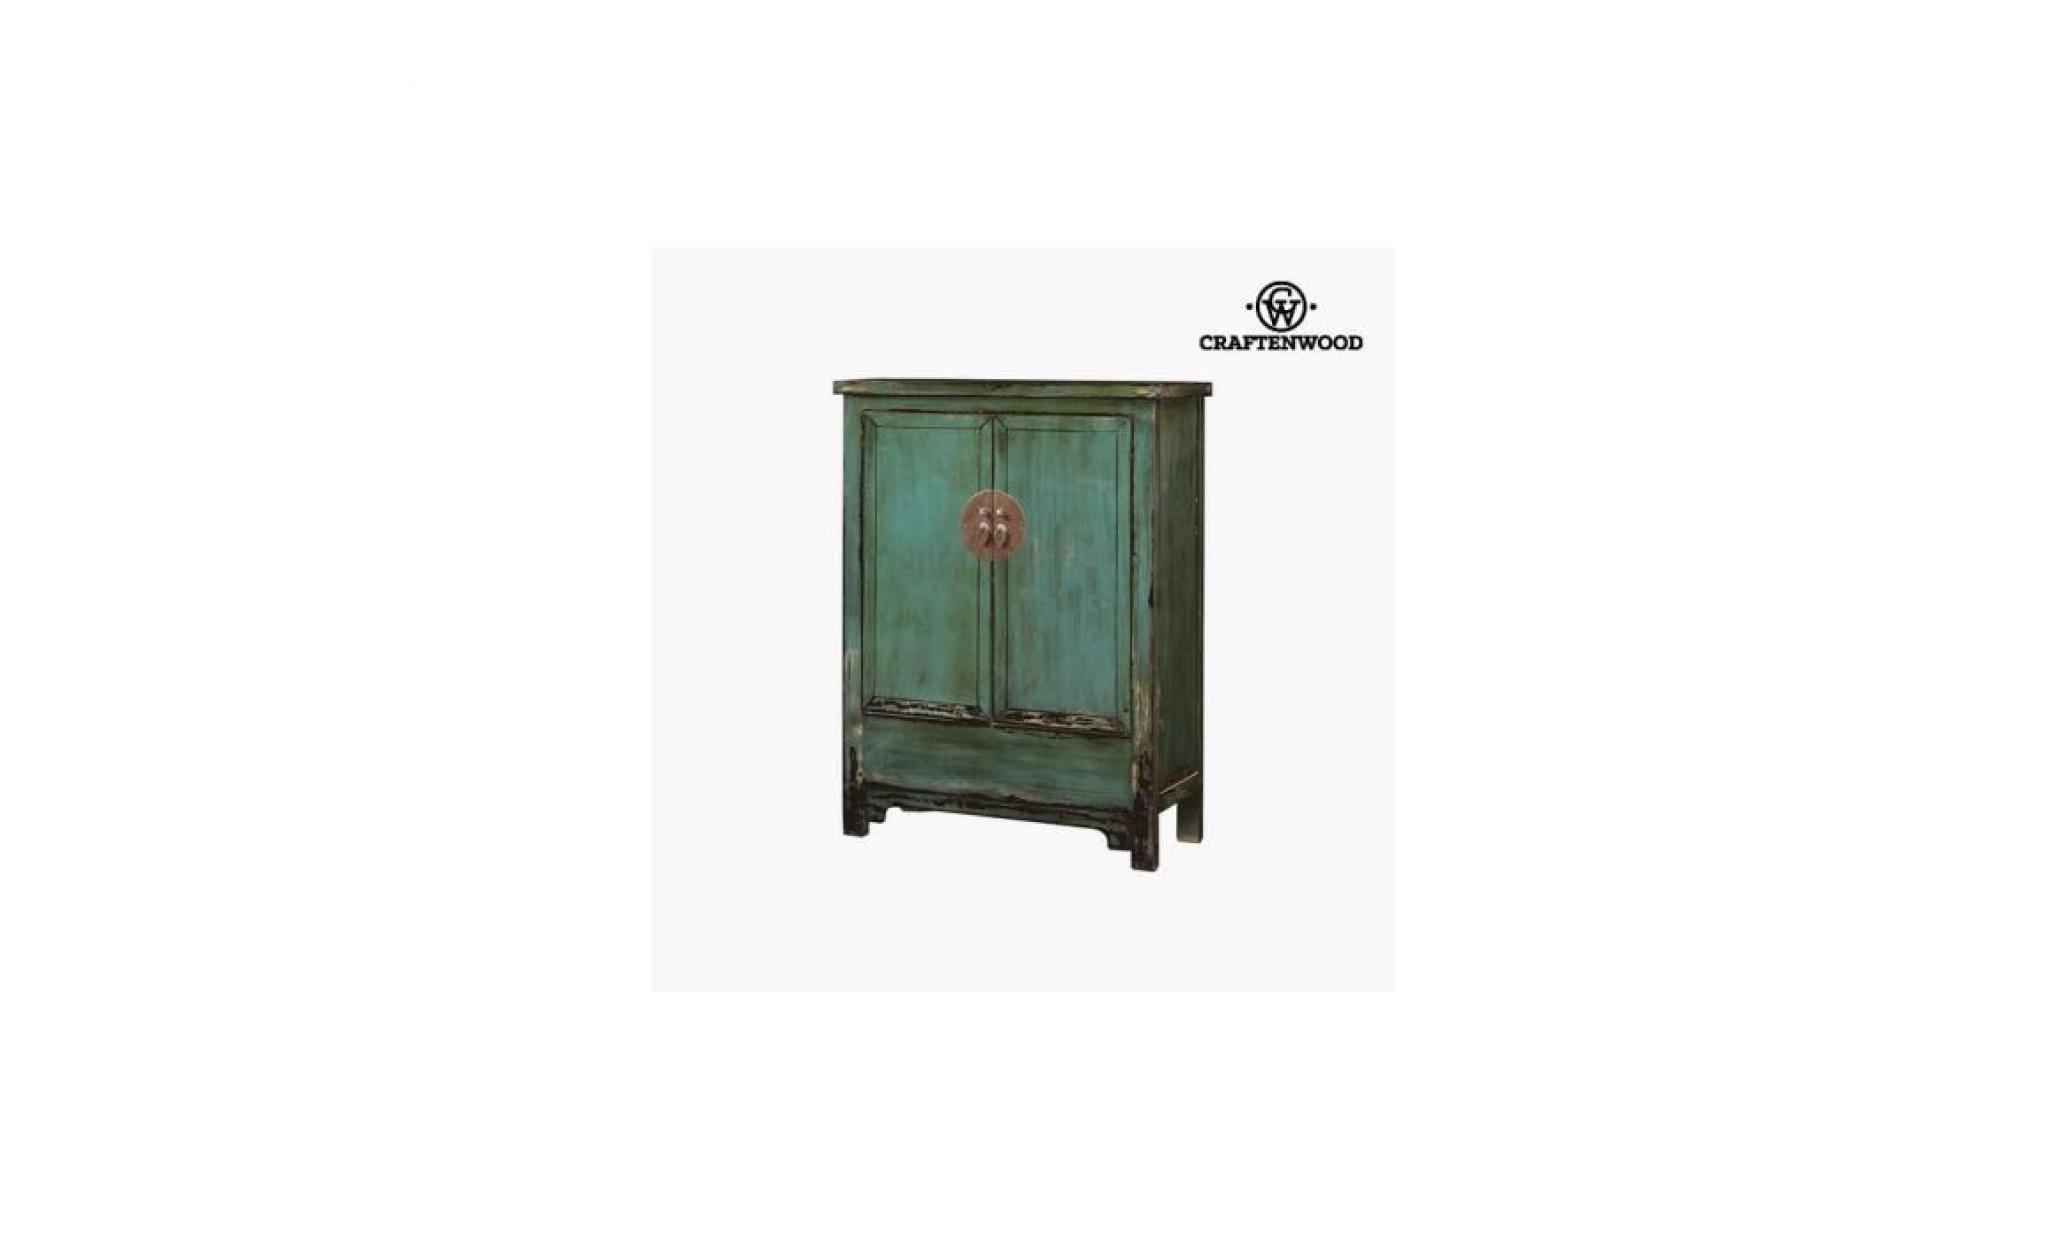 armoire bois bleu (120 x 132 x 40 cm)   collection country by craftenwood  134.000000 134,000000